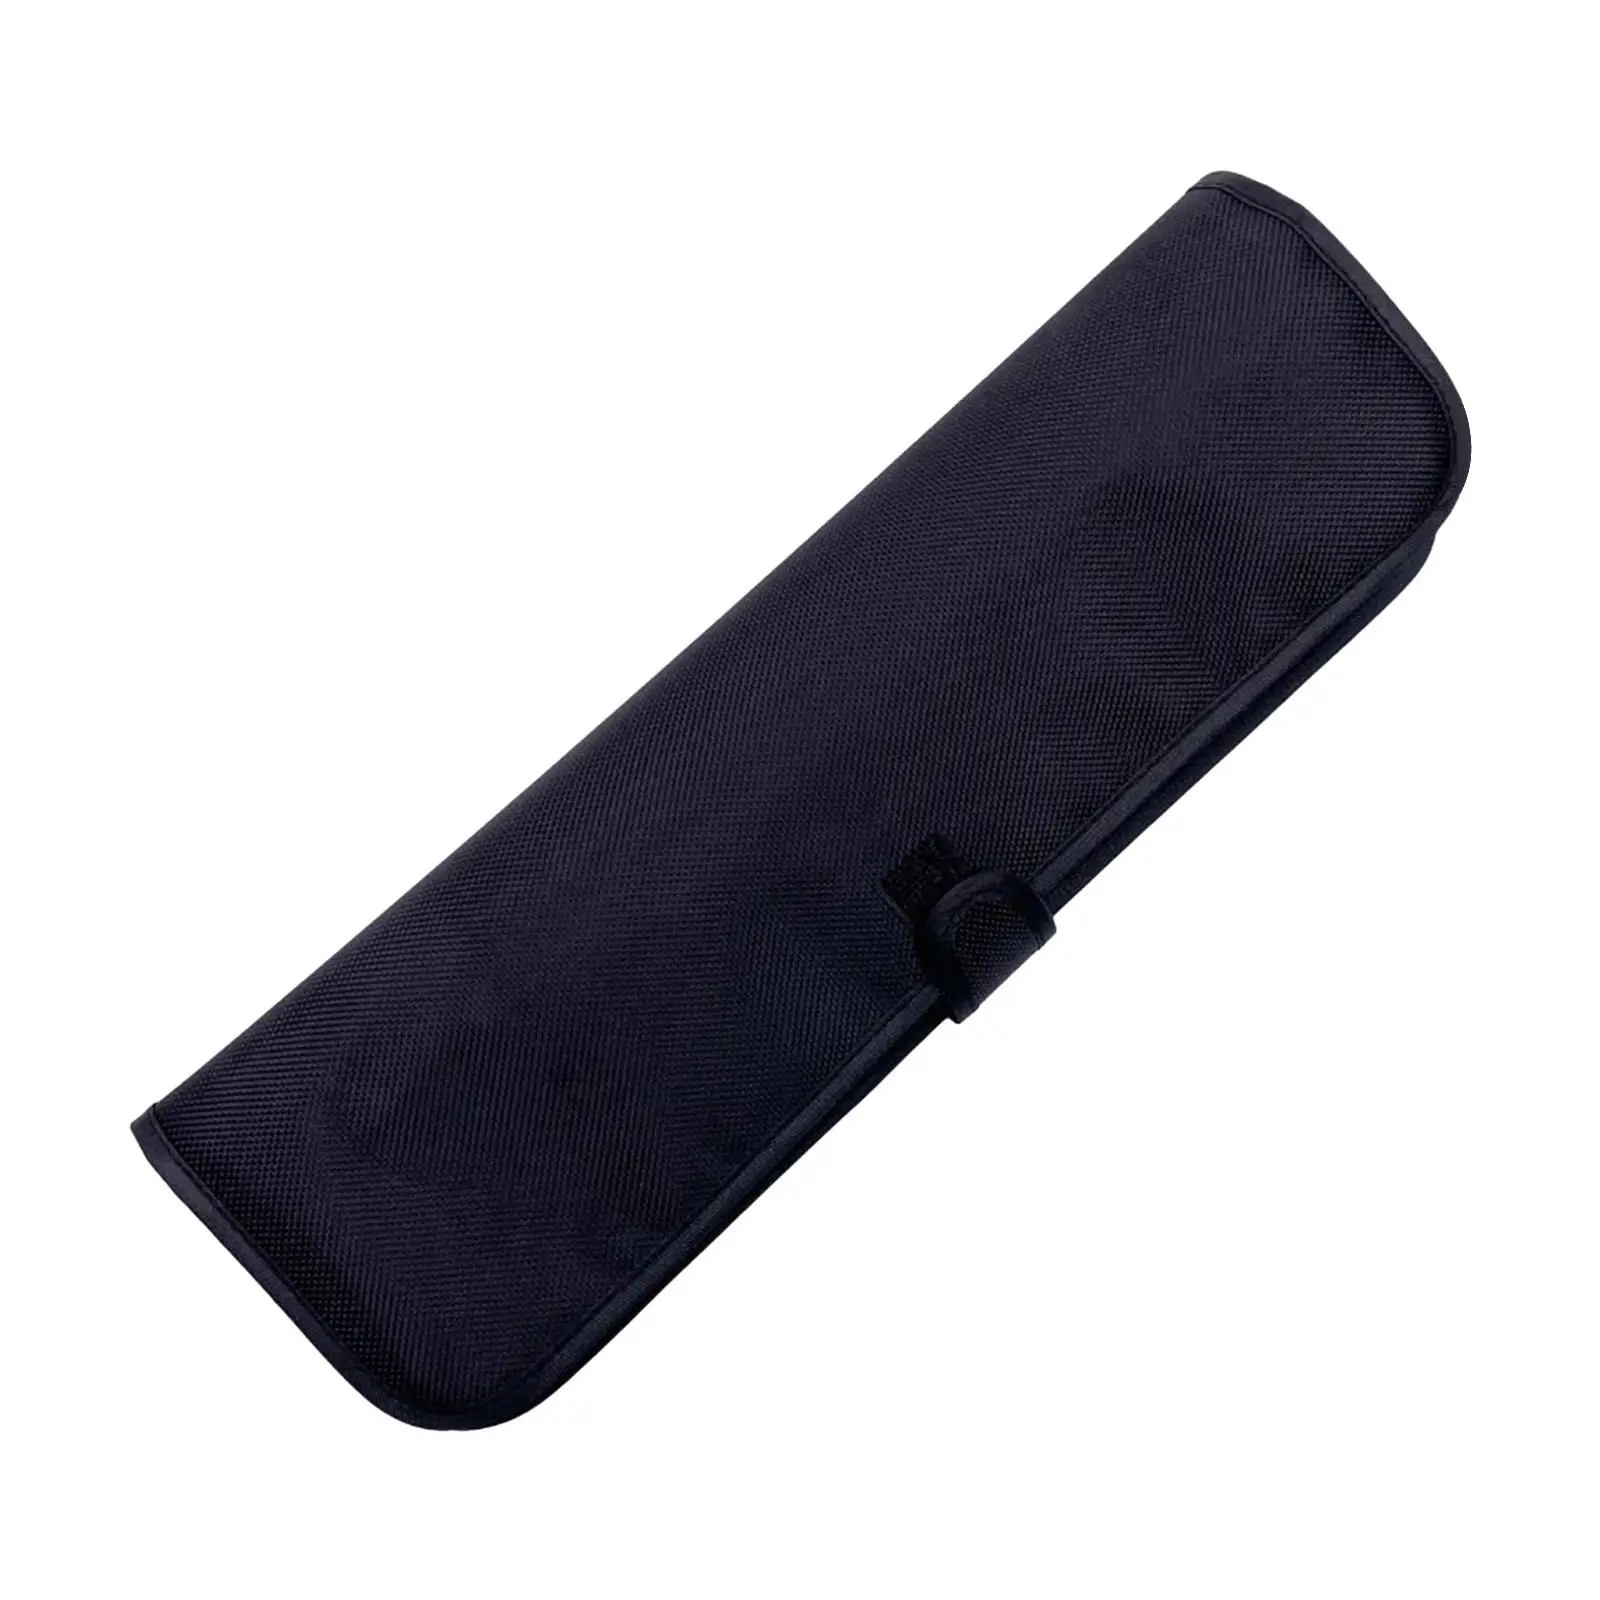 Hair Tools Travel Bag Portable Accessories Flat Iron Travel Case for Combs Styling Irons Clippers Flat Iron Straighteners